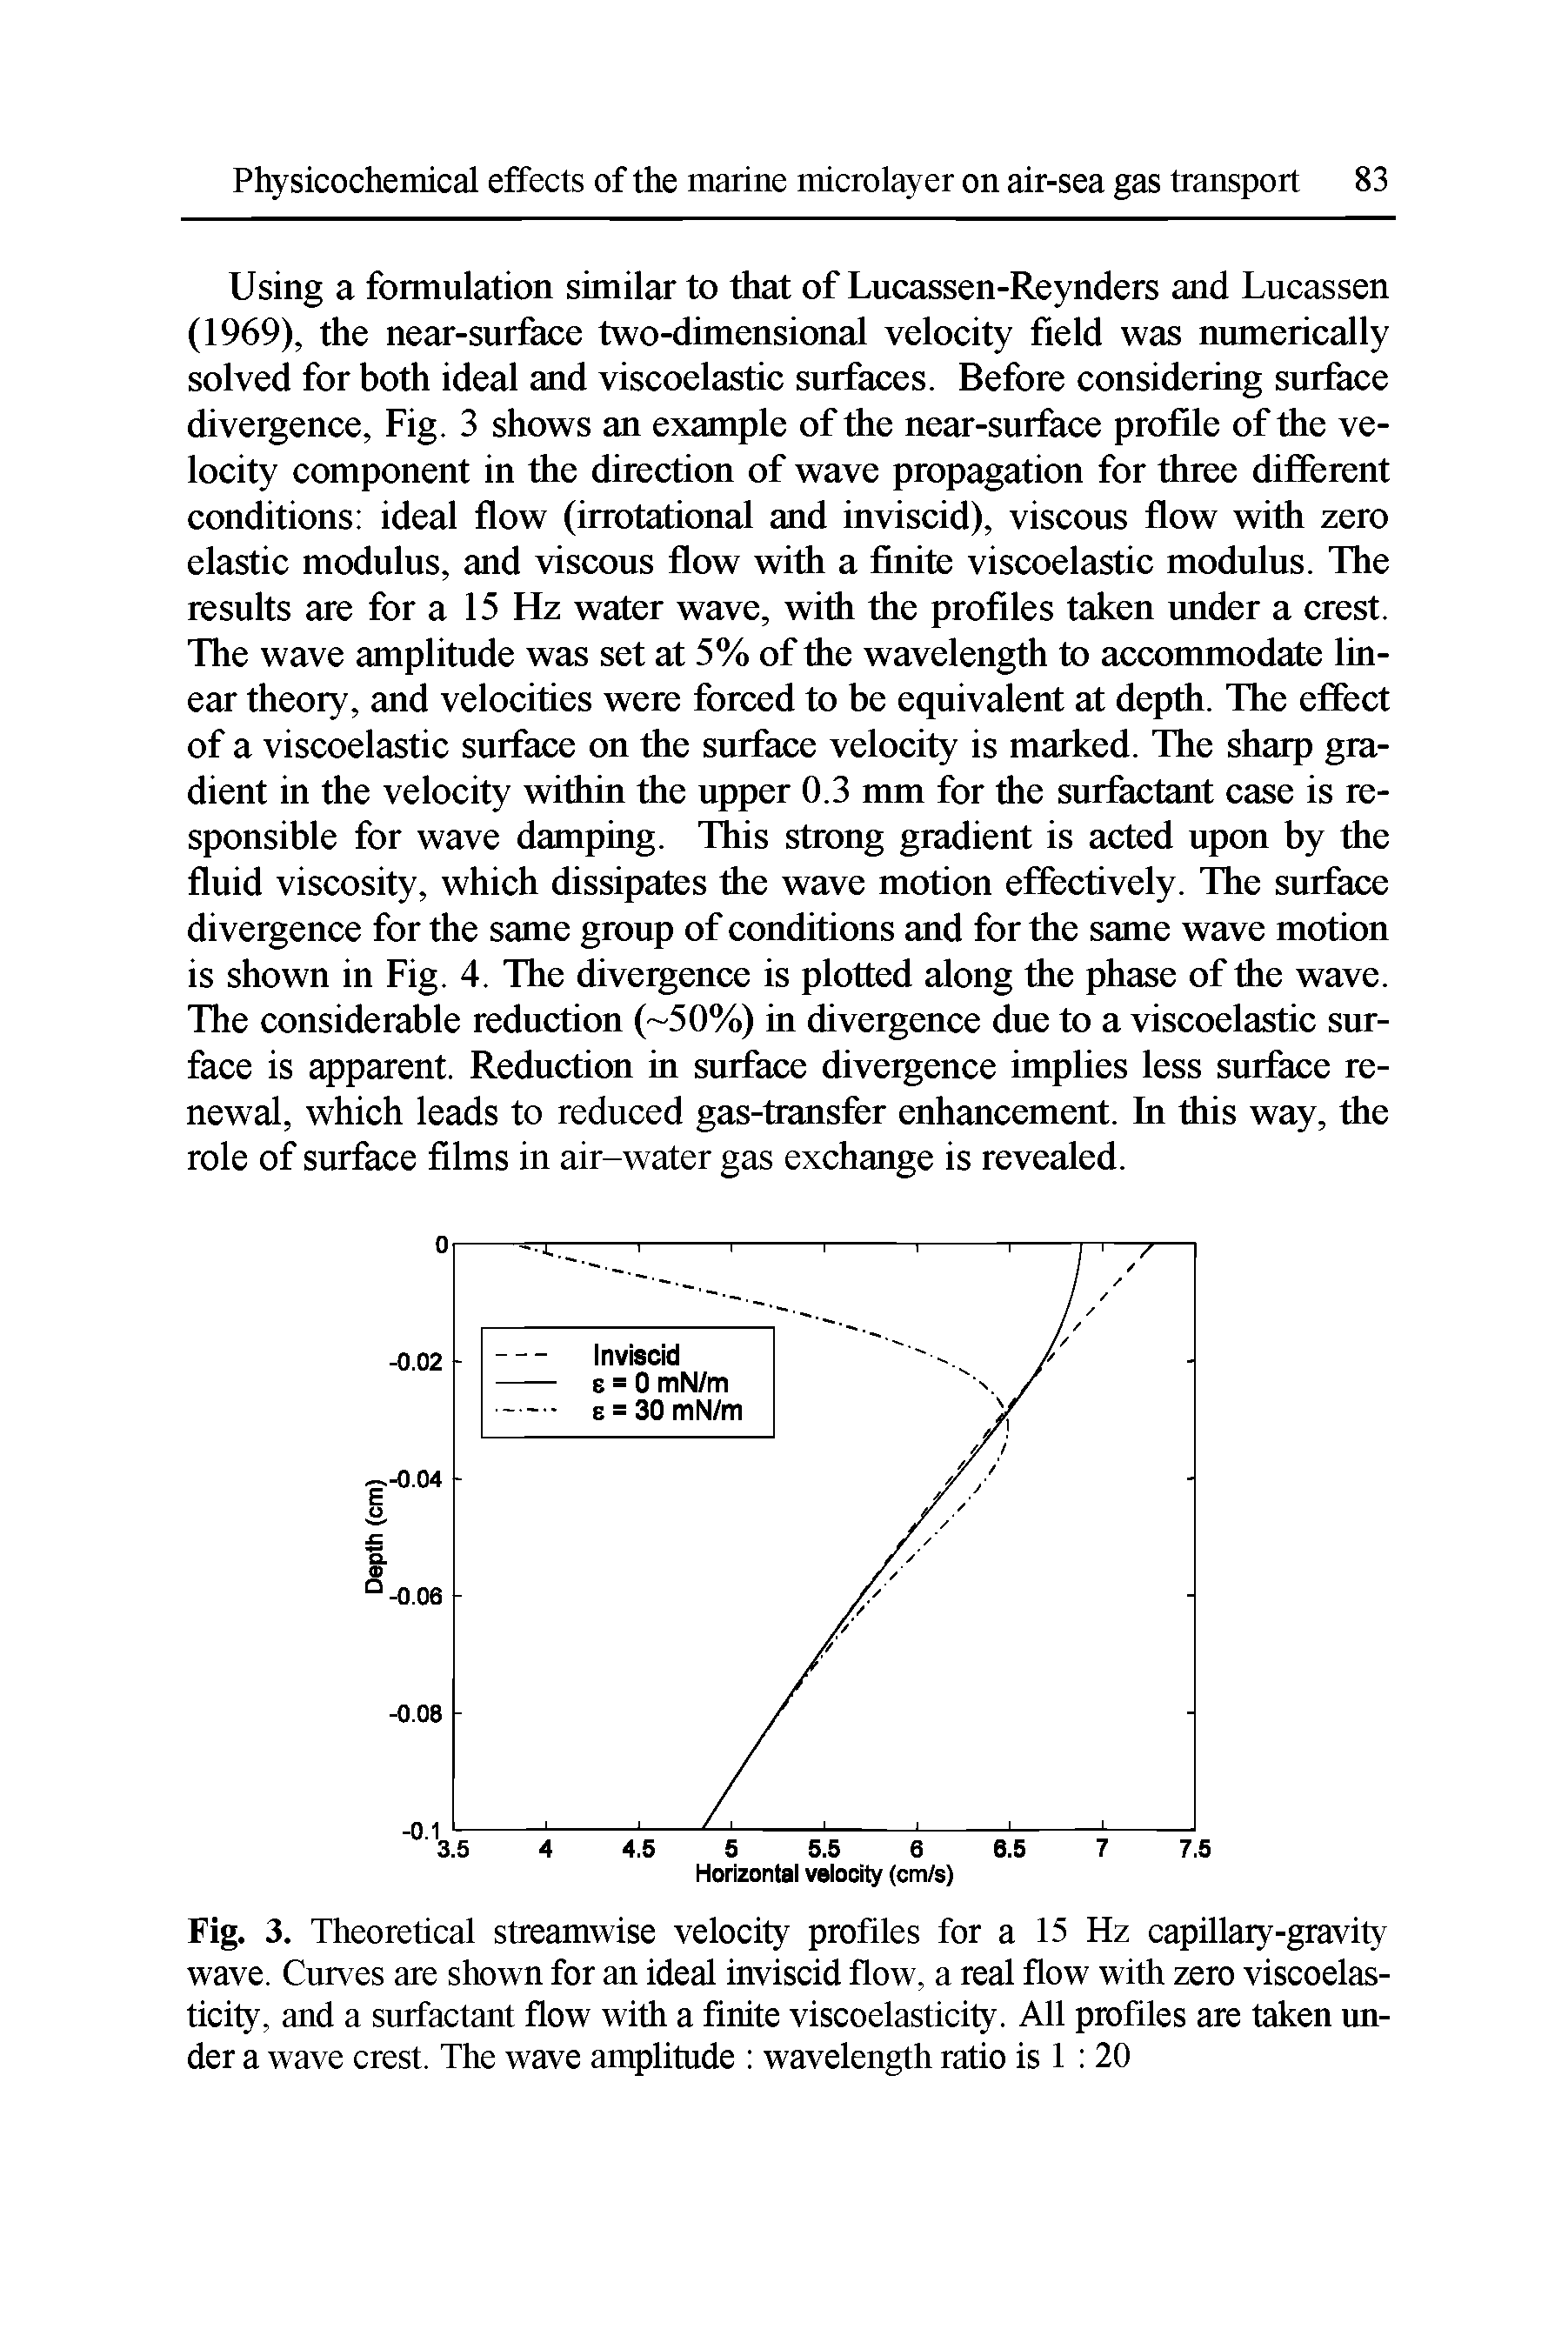 Fig. 3. Theoretical streamwise velocity profiles for a 15 Hz capillary-gravity wave. Curves are shown for an ideal inviscid flow, a real flow with zero viscoelasticity, and a surfactant flow with a finite viscoelasticity. All profiles are taken under a wave crest. The wave amplitude wavelength ratio is 1 20...